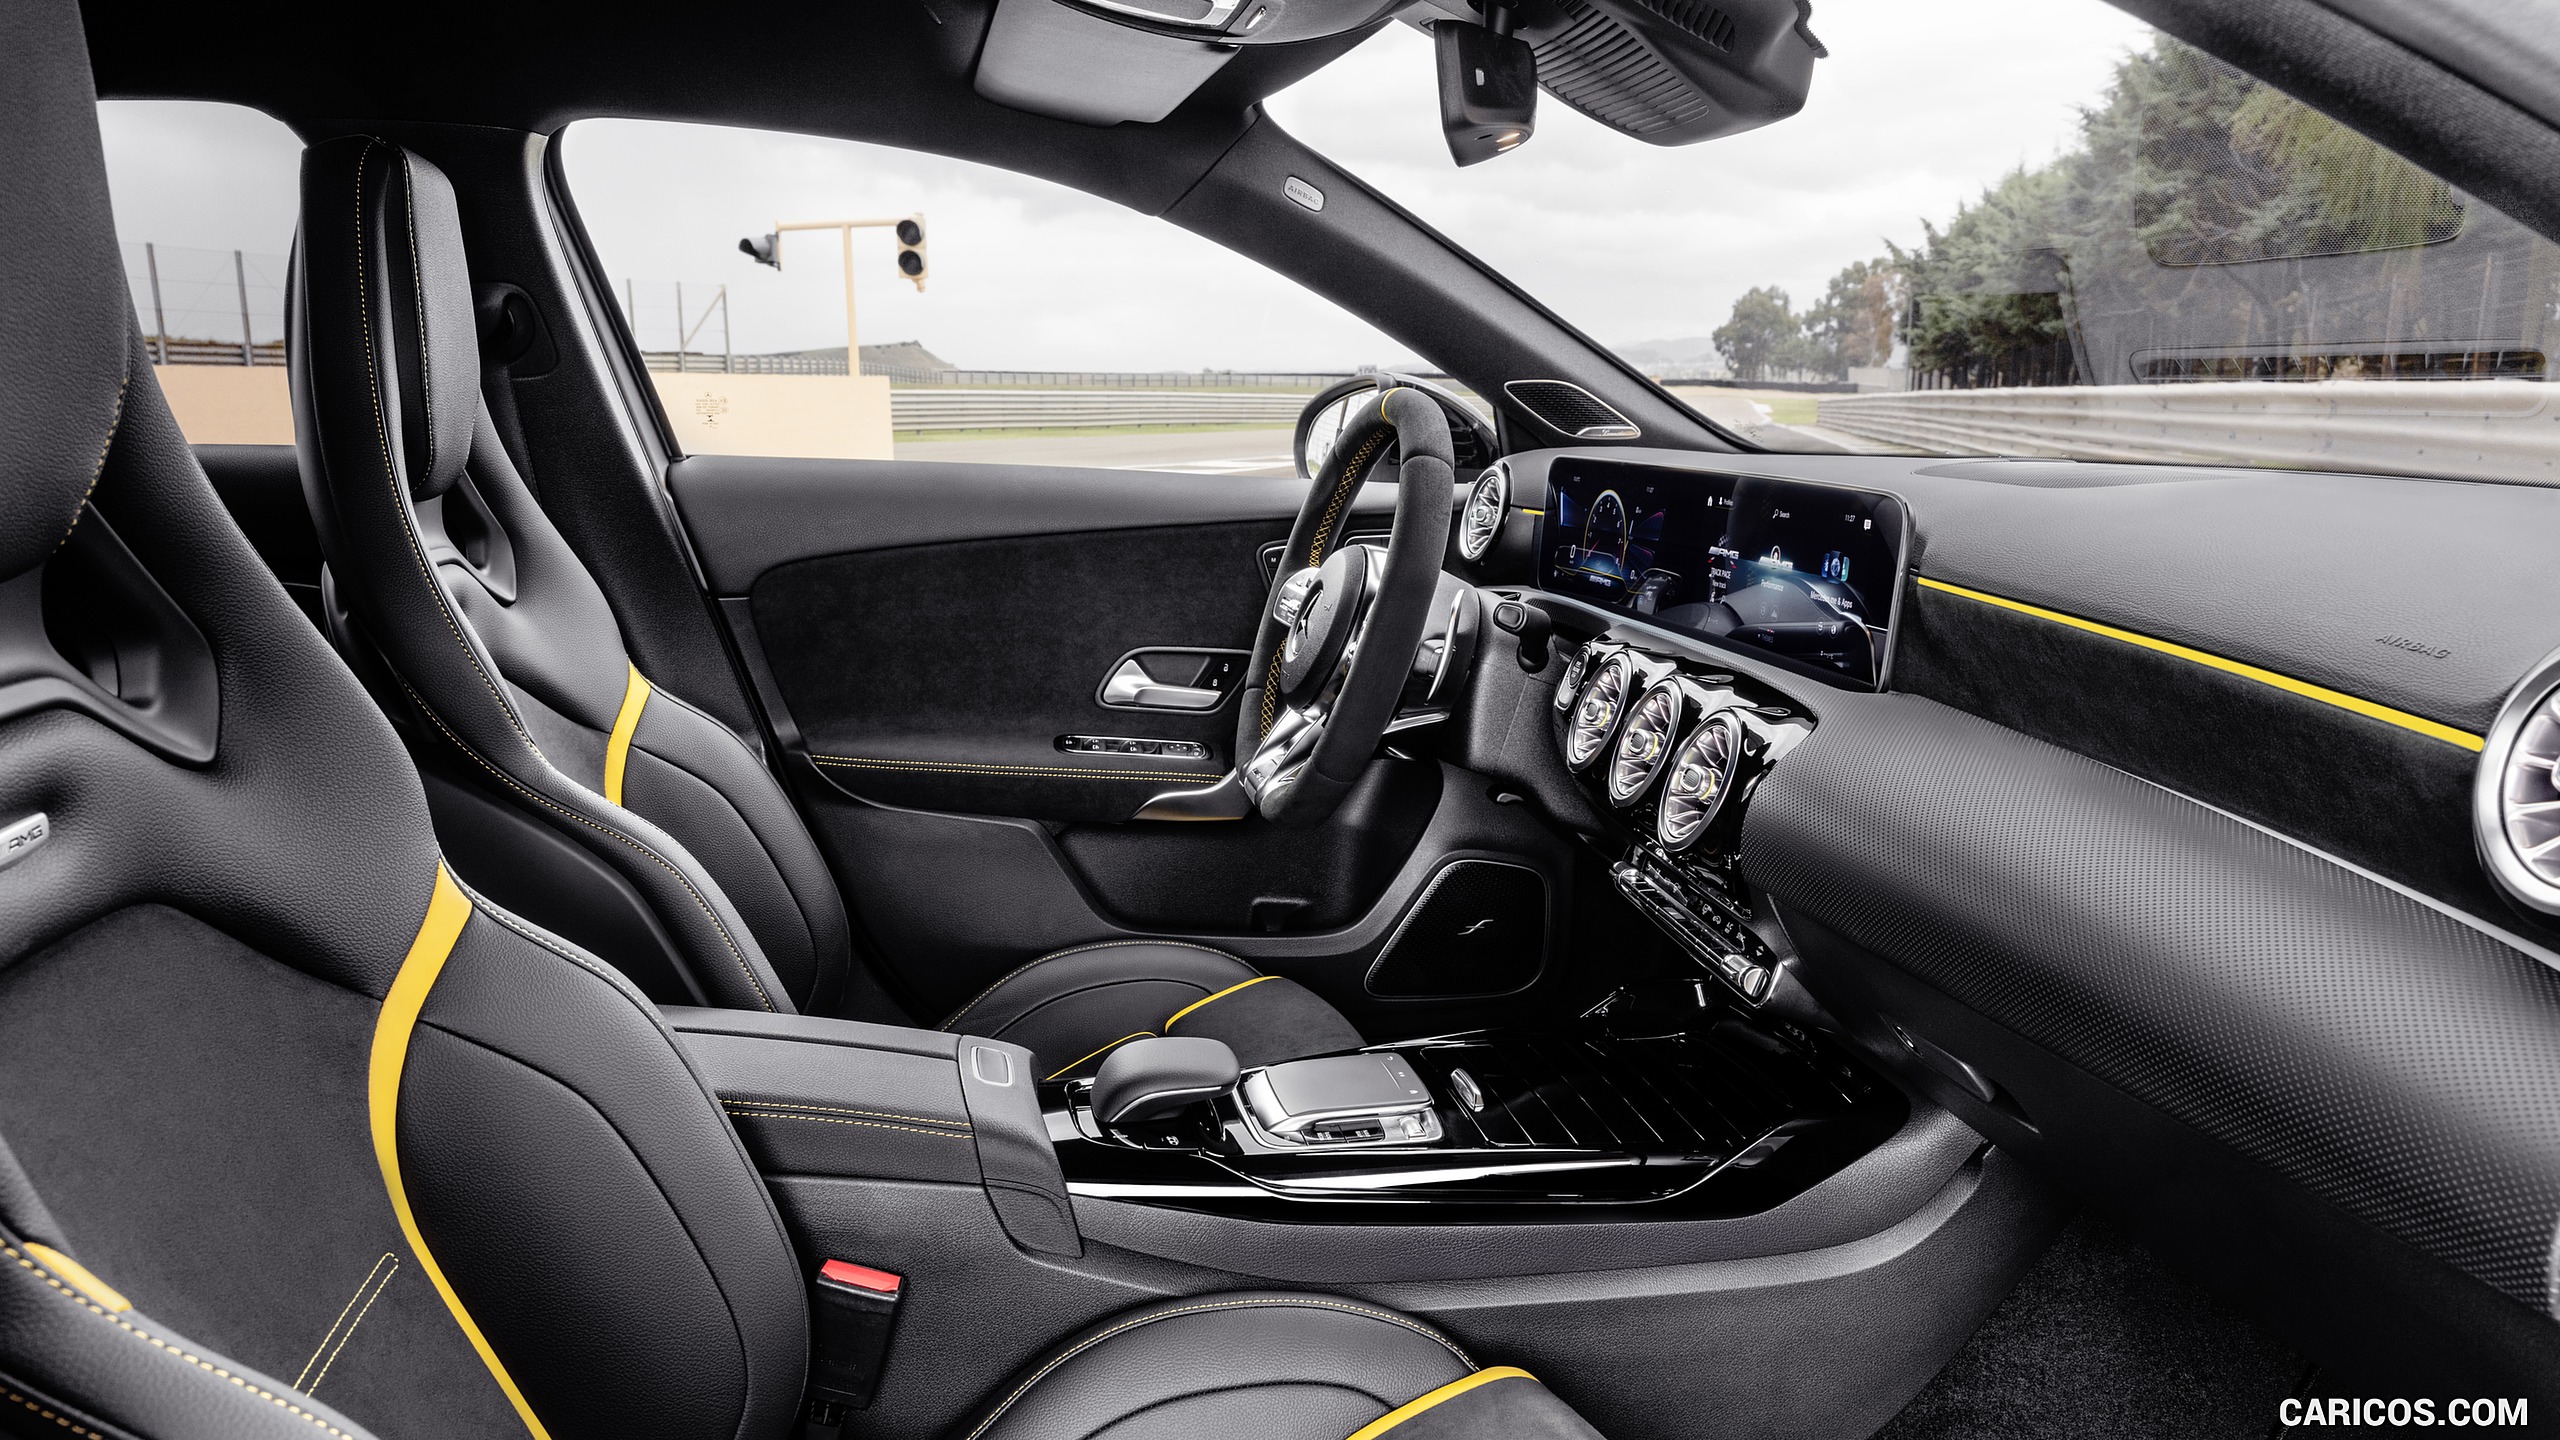 2020 Mercedes-AMG A 45 S 4MATIC+ - Interior, Front Seats, #39 of 188